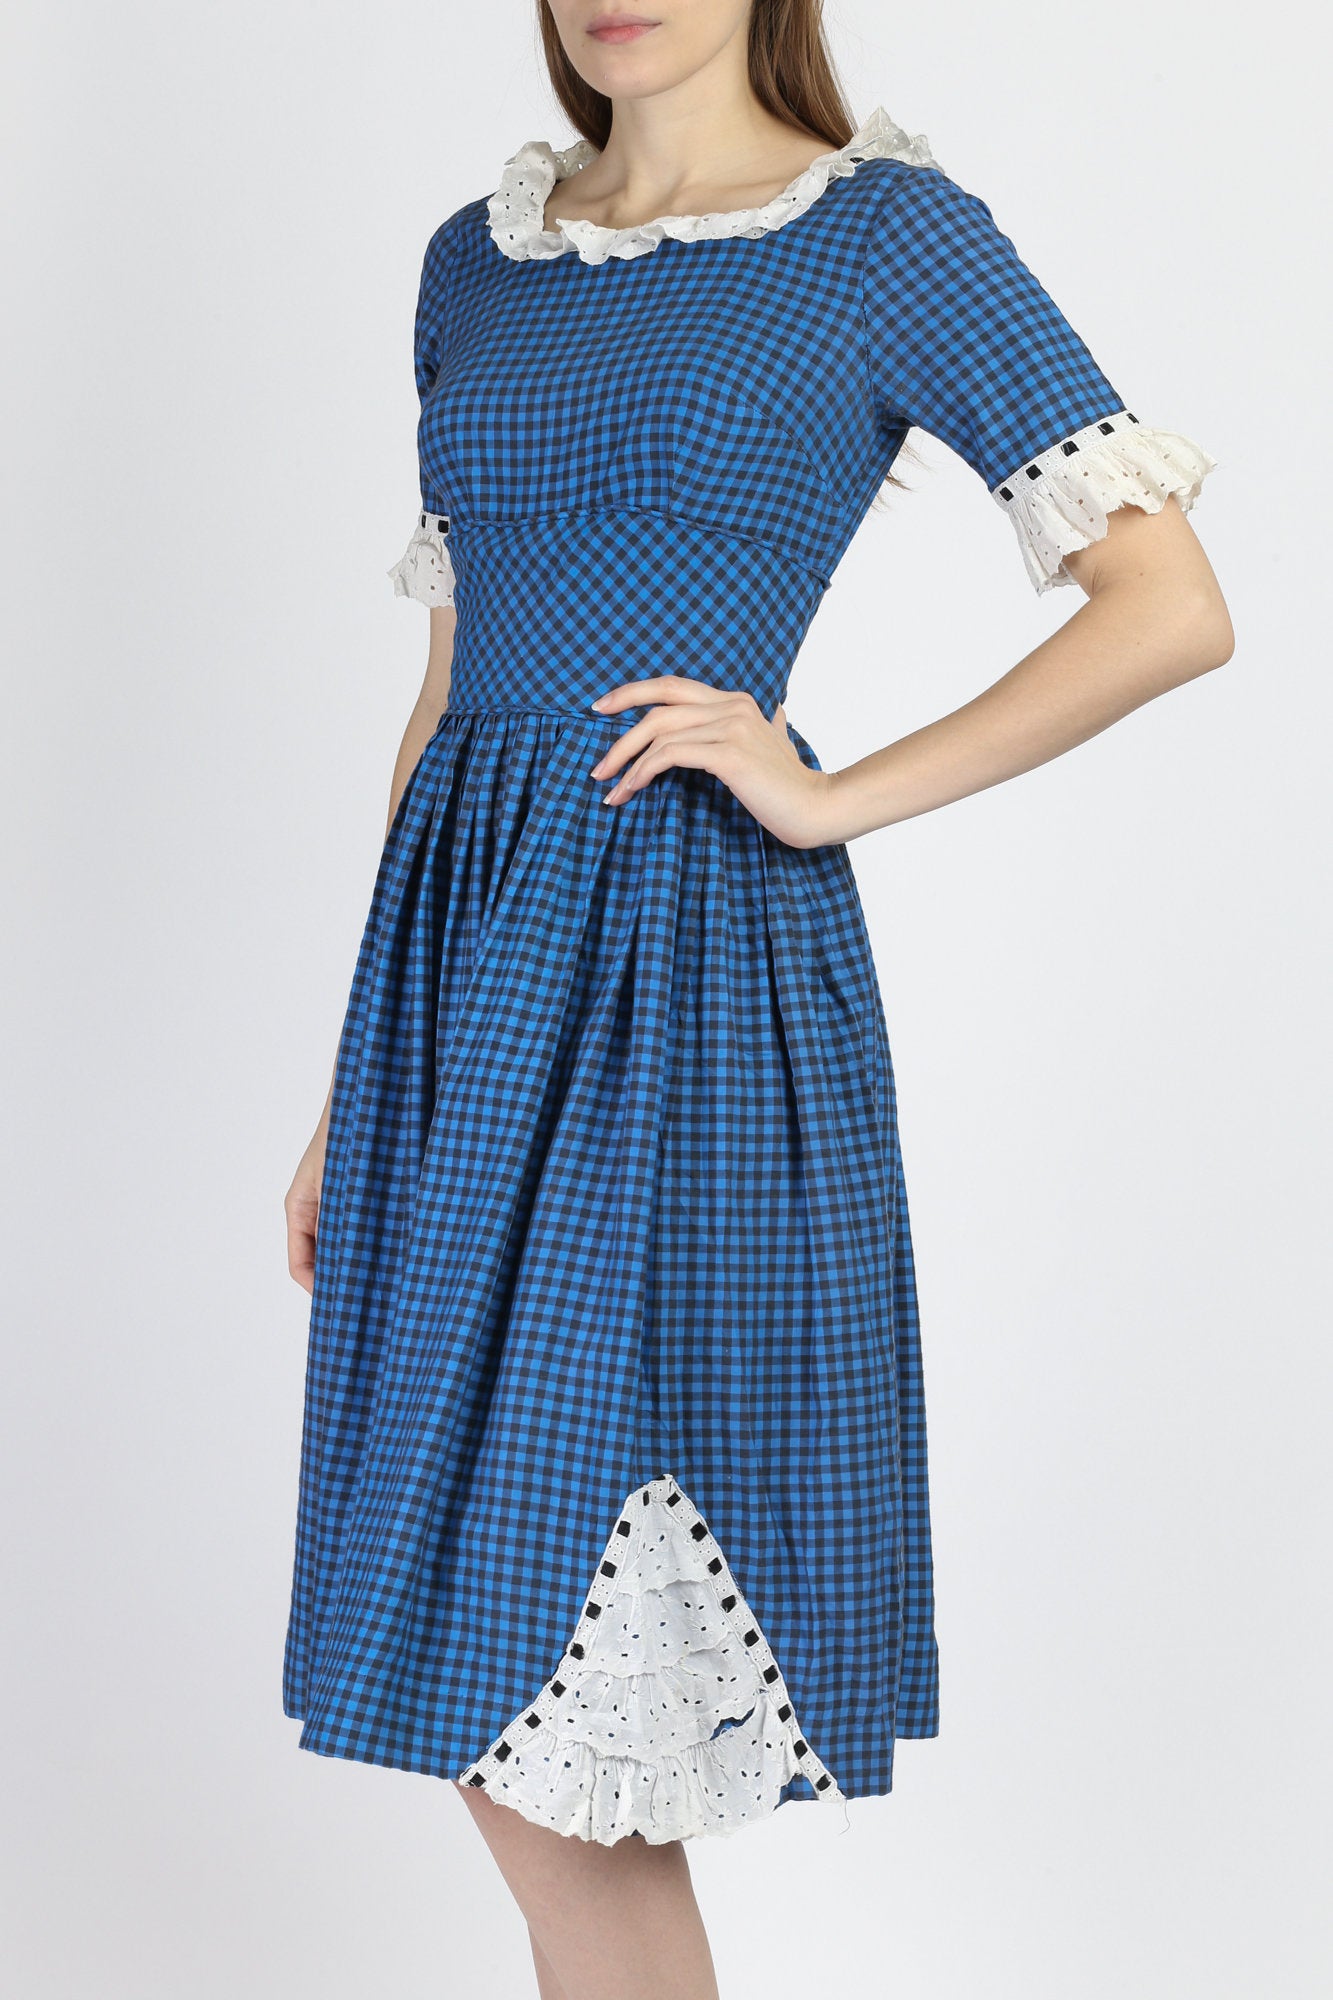 1950s Blue Gingham Checkered Day Dress - XS to Small